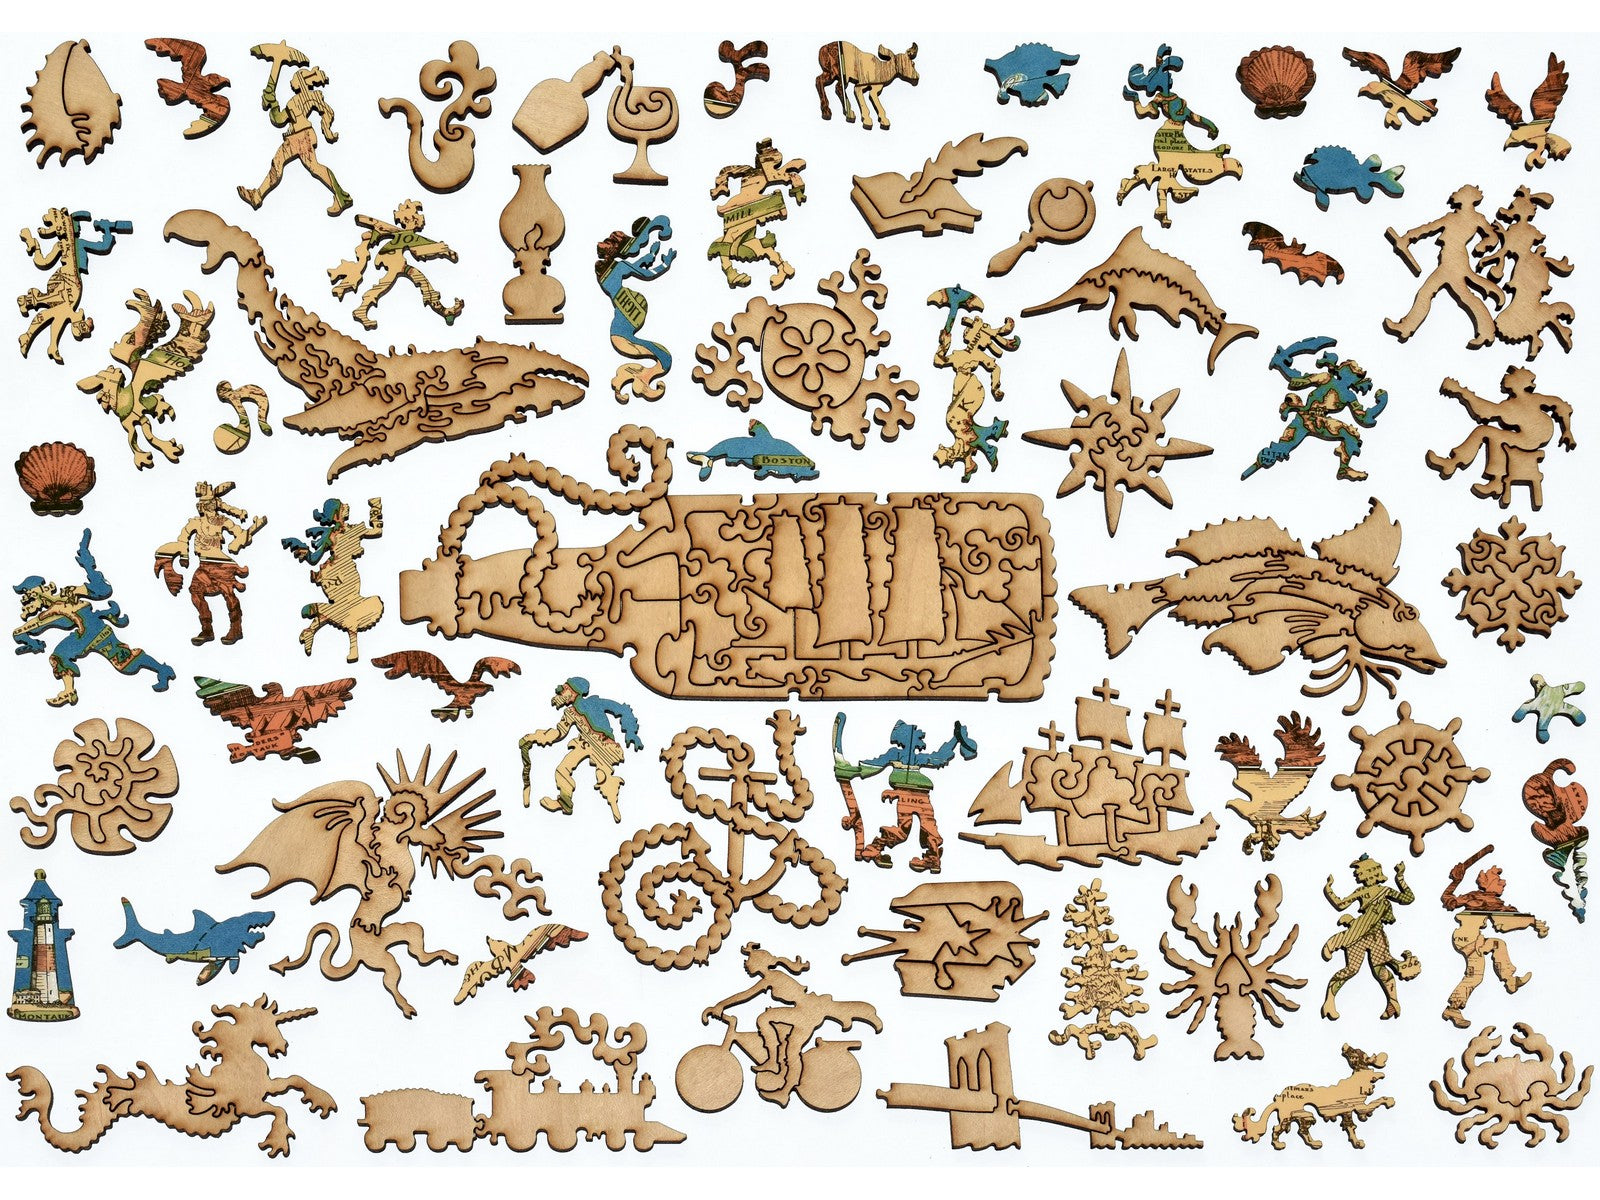 The whimsies that can be found in the puzzle, Map of Long Island.